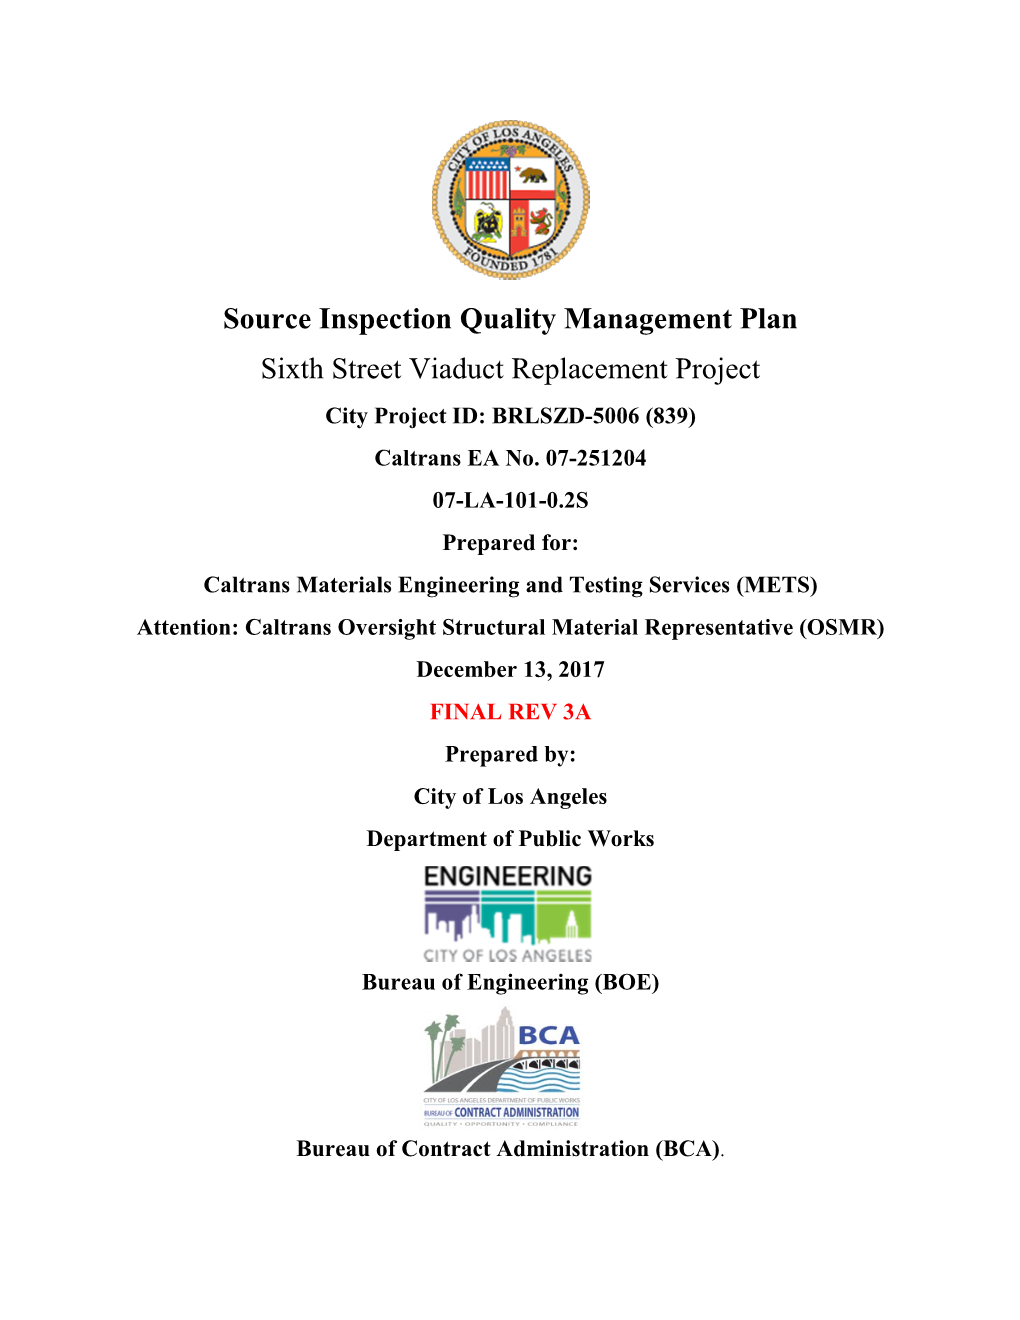 Source Inspection Quality Management Plan Sixth Street Viaduct Replacement Project City Project ID: BRLSZD-5006 (839) Caltrans EA No